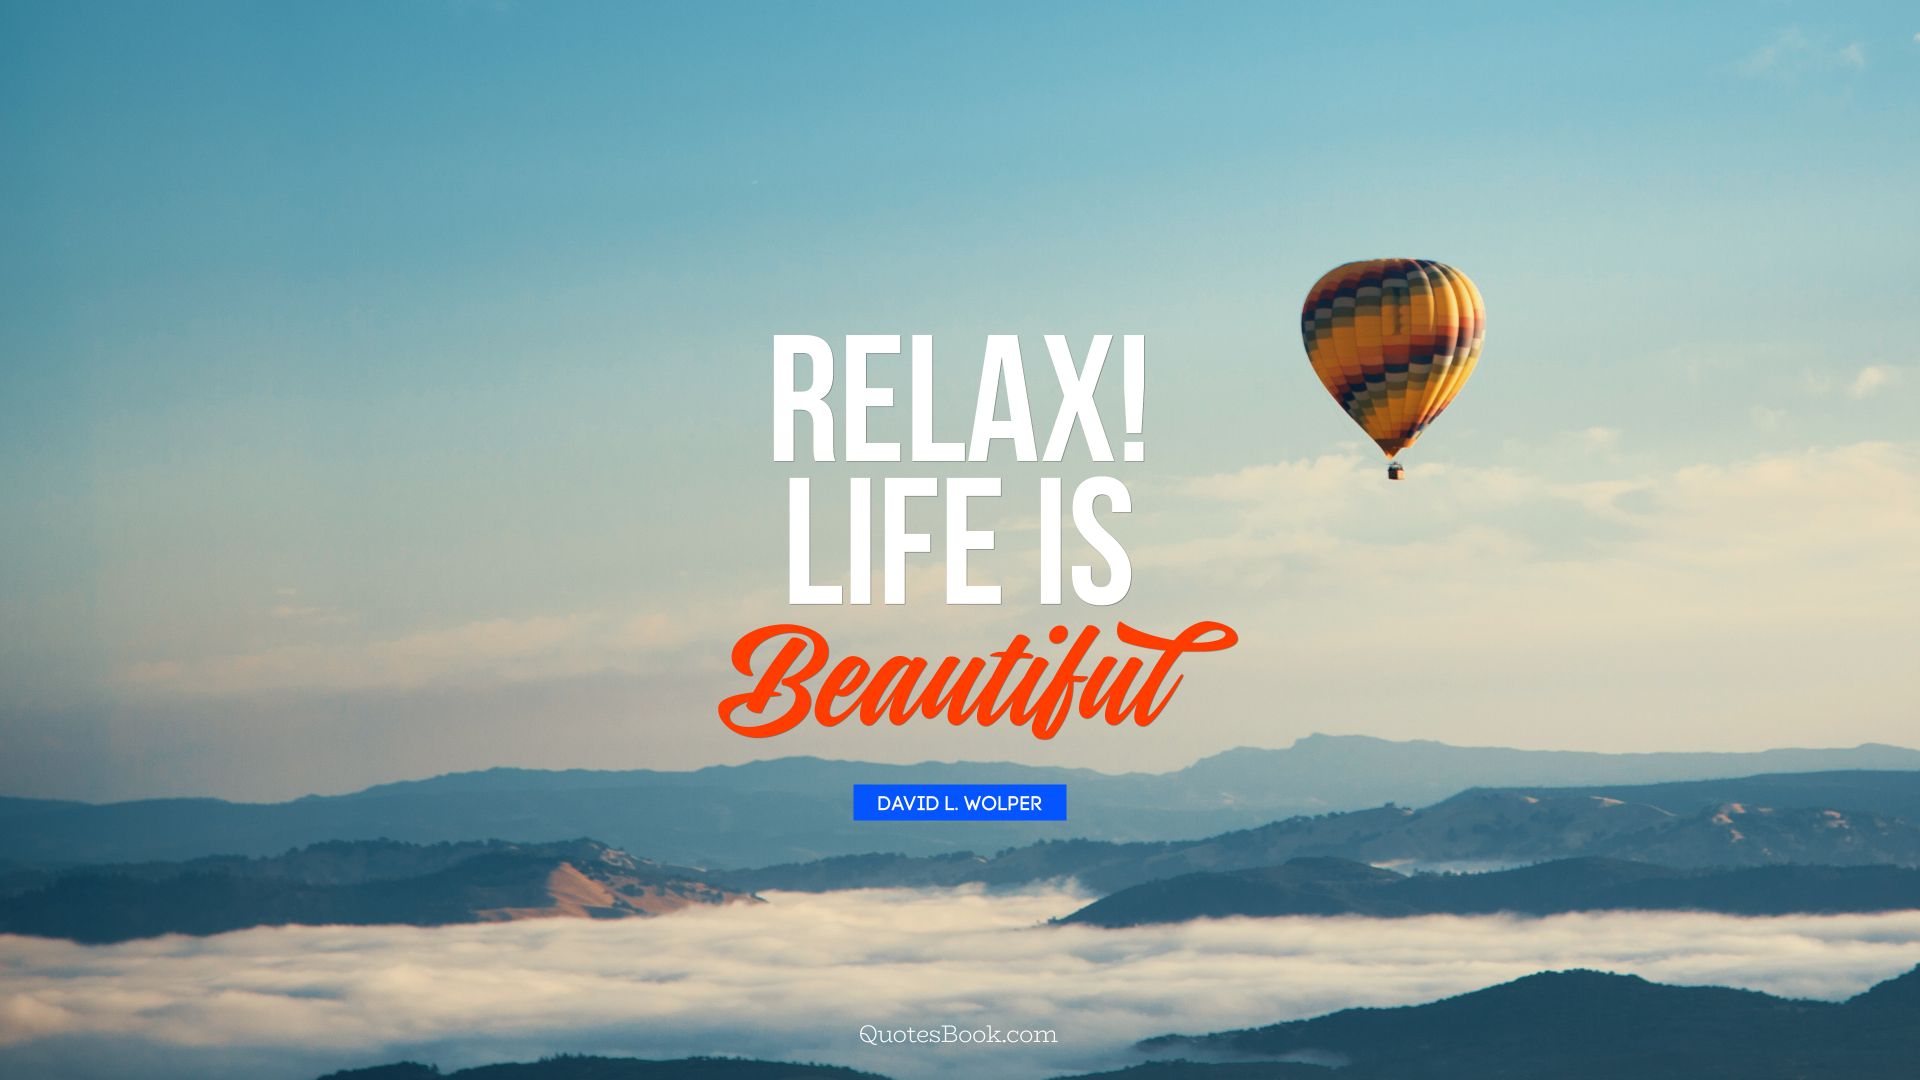 Relax! Life is beautiful. - Quote by David L. Wolper